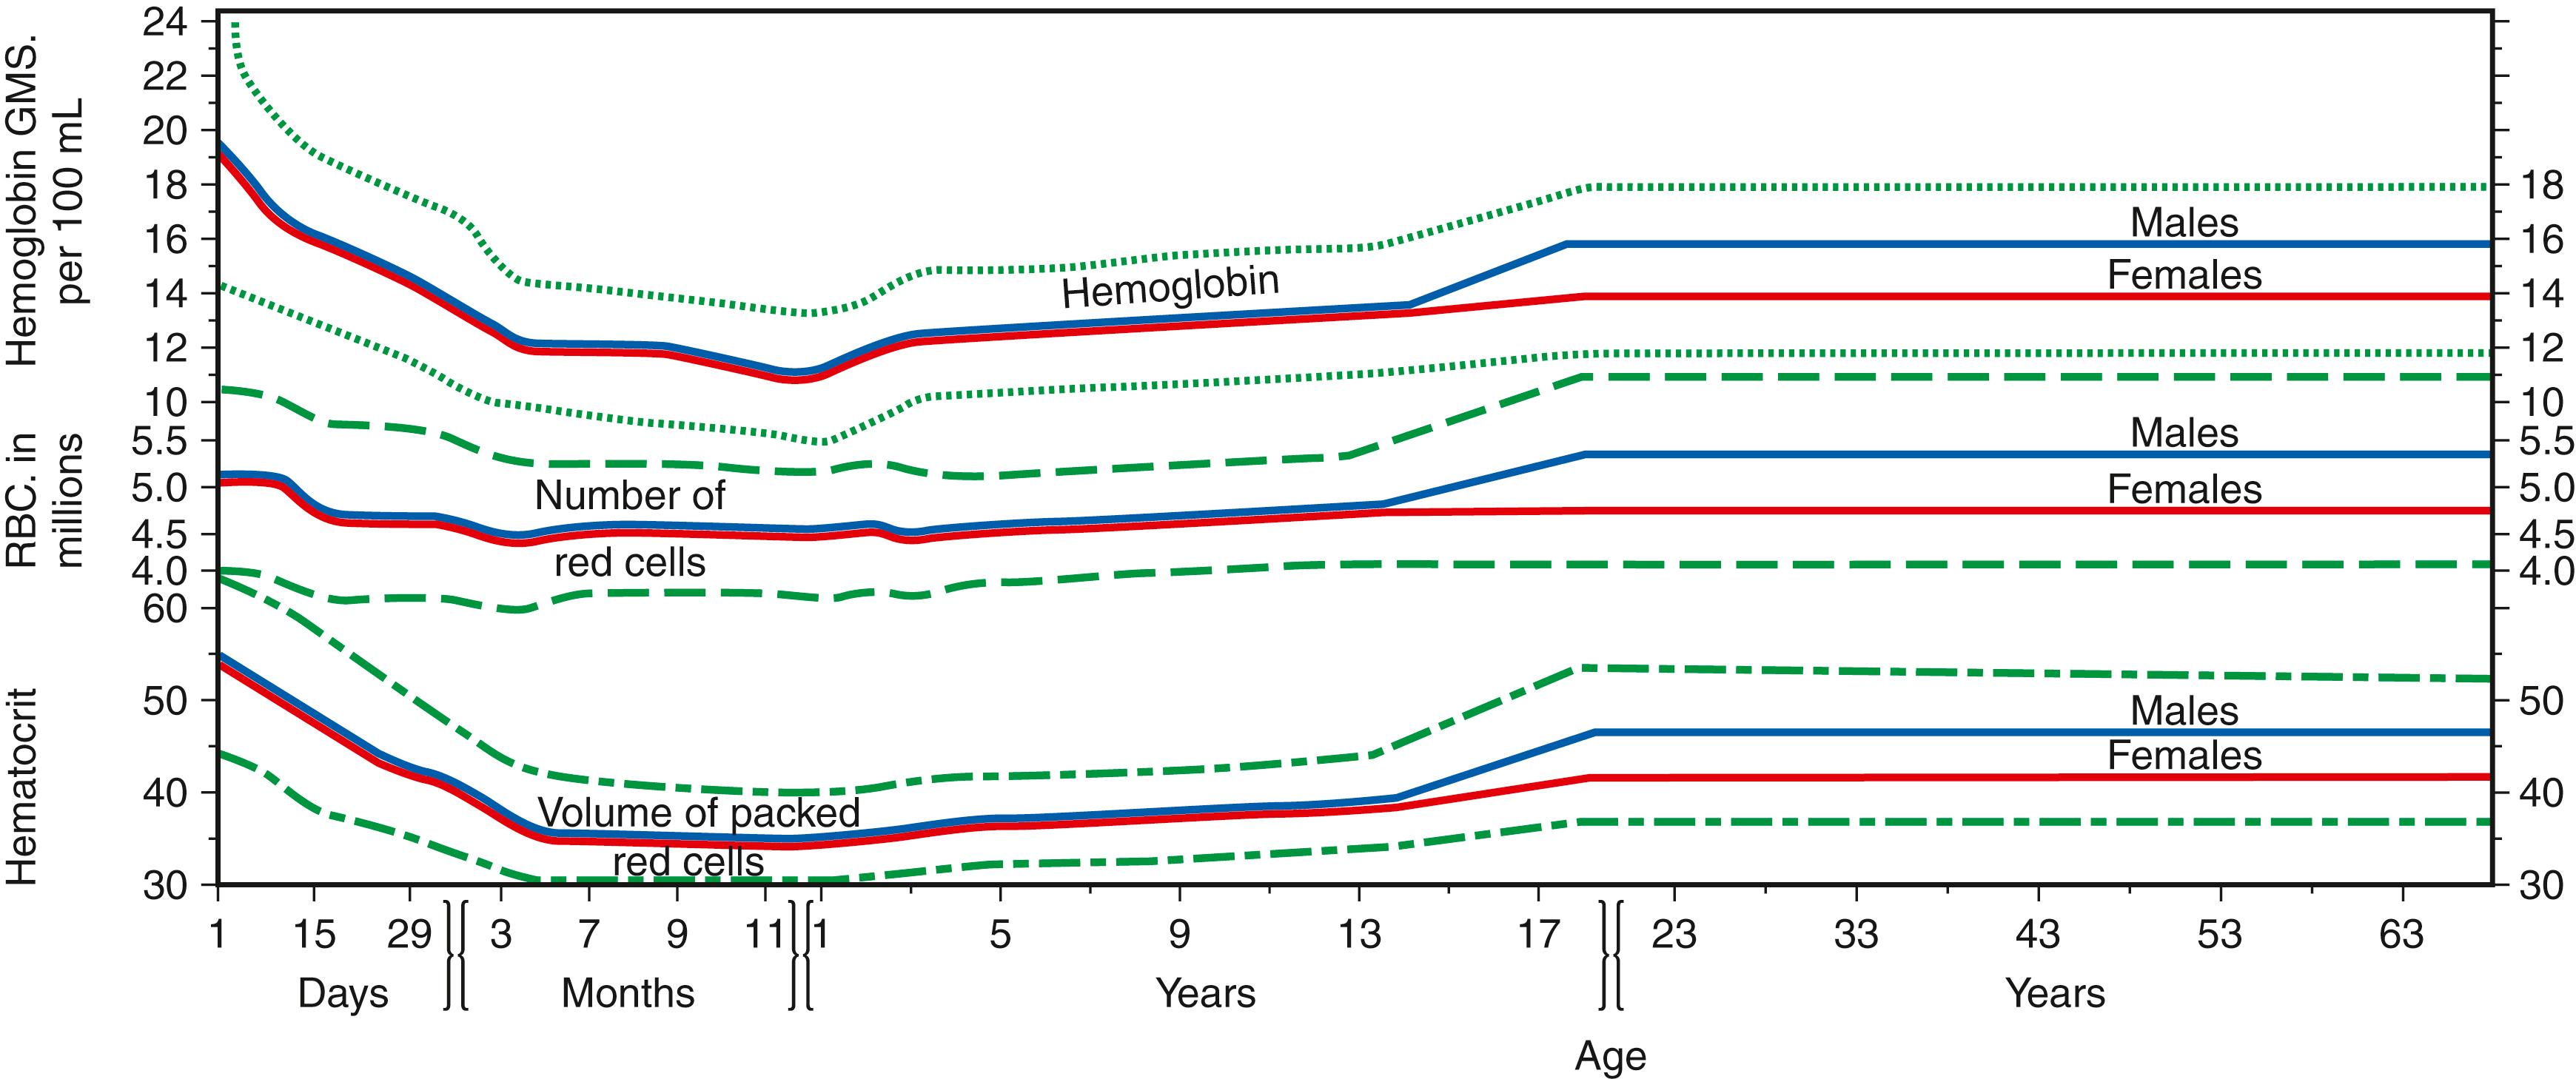 Figure 31.3, Values for hemoglobin (Hb), hematocrit (Hct; volume of packed red cells), and red cell count from birth to old age. Mean values are heavy lines. Reference interval for Hb is indicated by dotted lines, for red cell counts by dashed lines, and for Hct by dotted and dashed lines. The scales on the ordinate are similar, so that relative changes in Hb, red cell count, and Hct are apparent on inspection. The scale for age, however, is progressively altered ( Wintrobe, 1974 ).